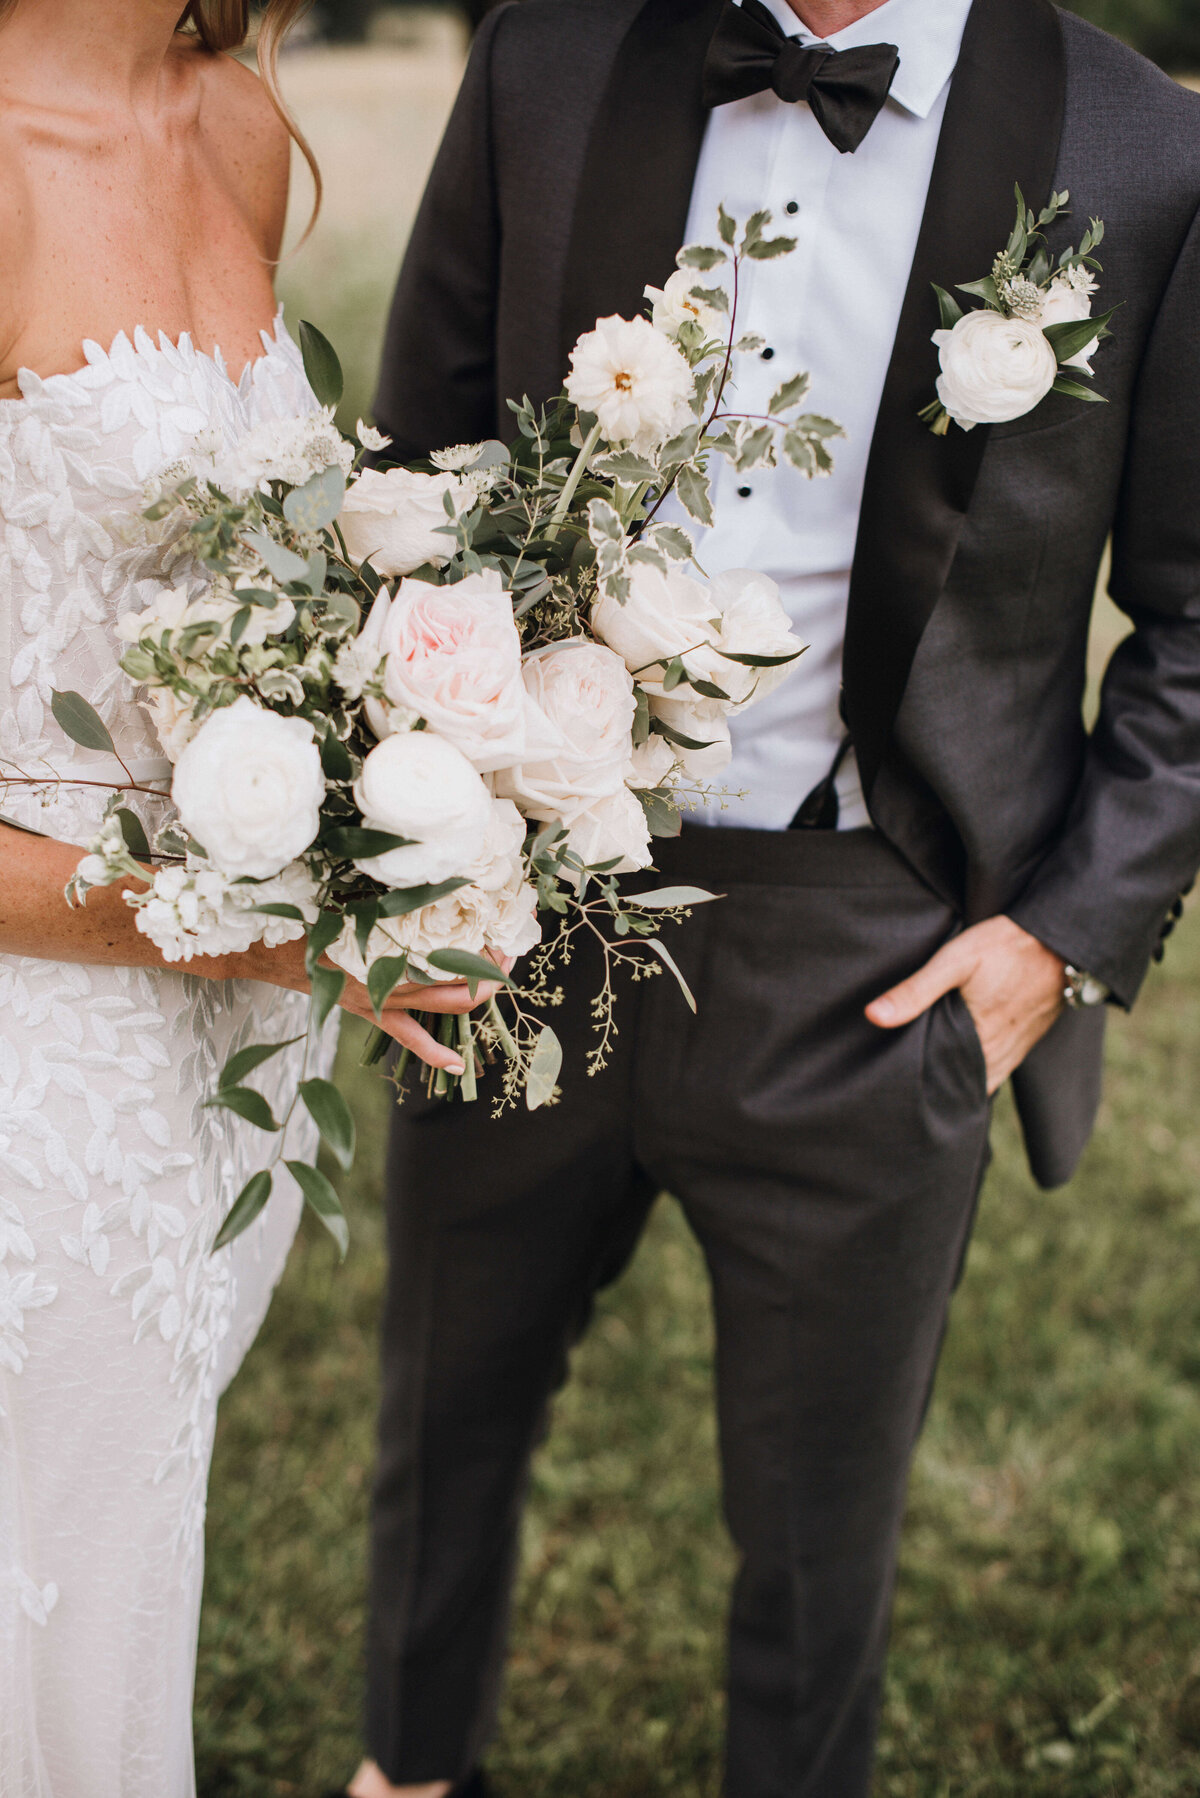 Detail of a bride and groom with white, green and blush wedding flowers